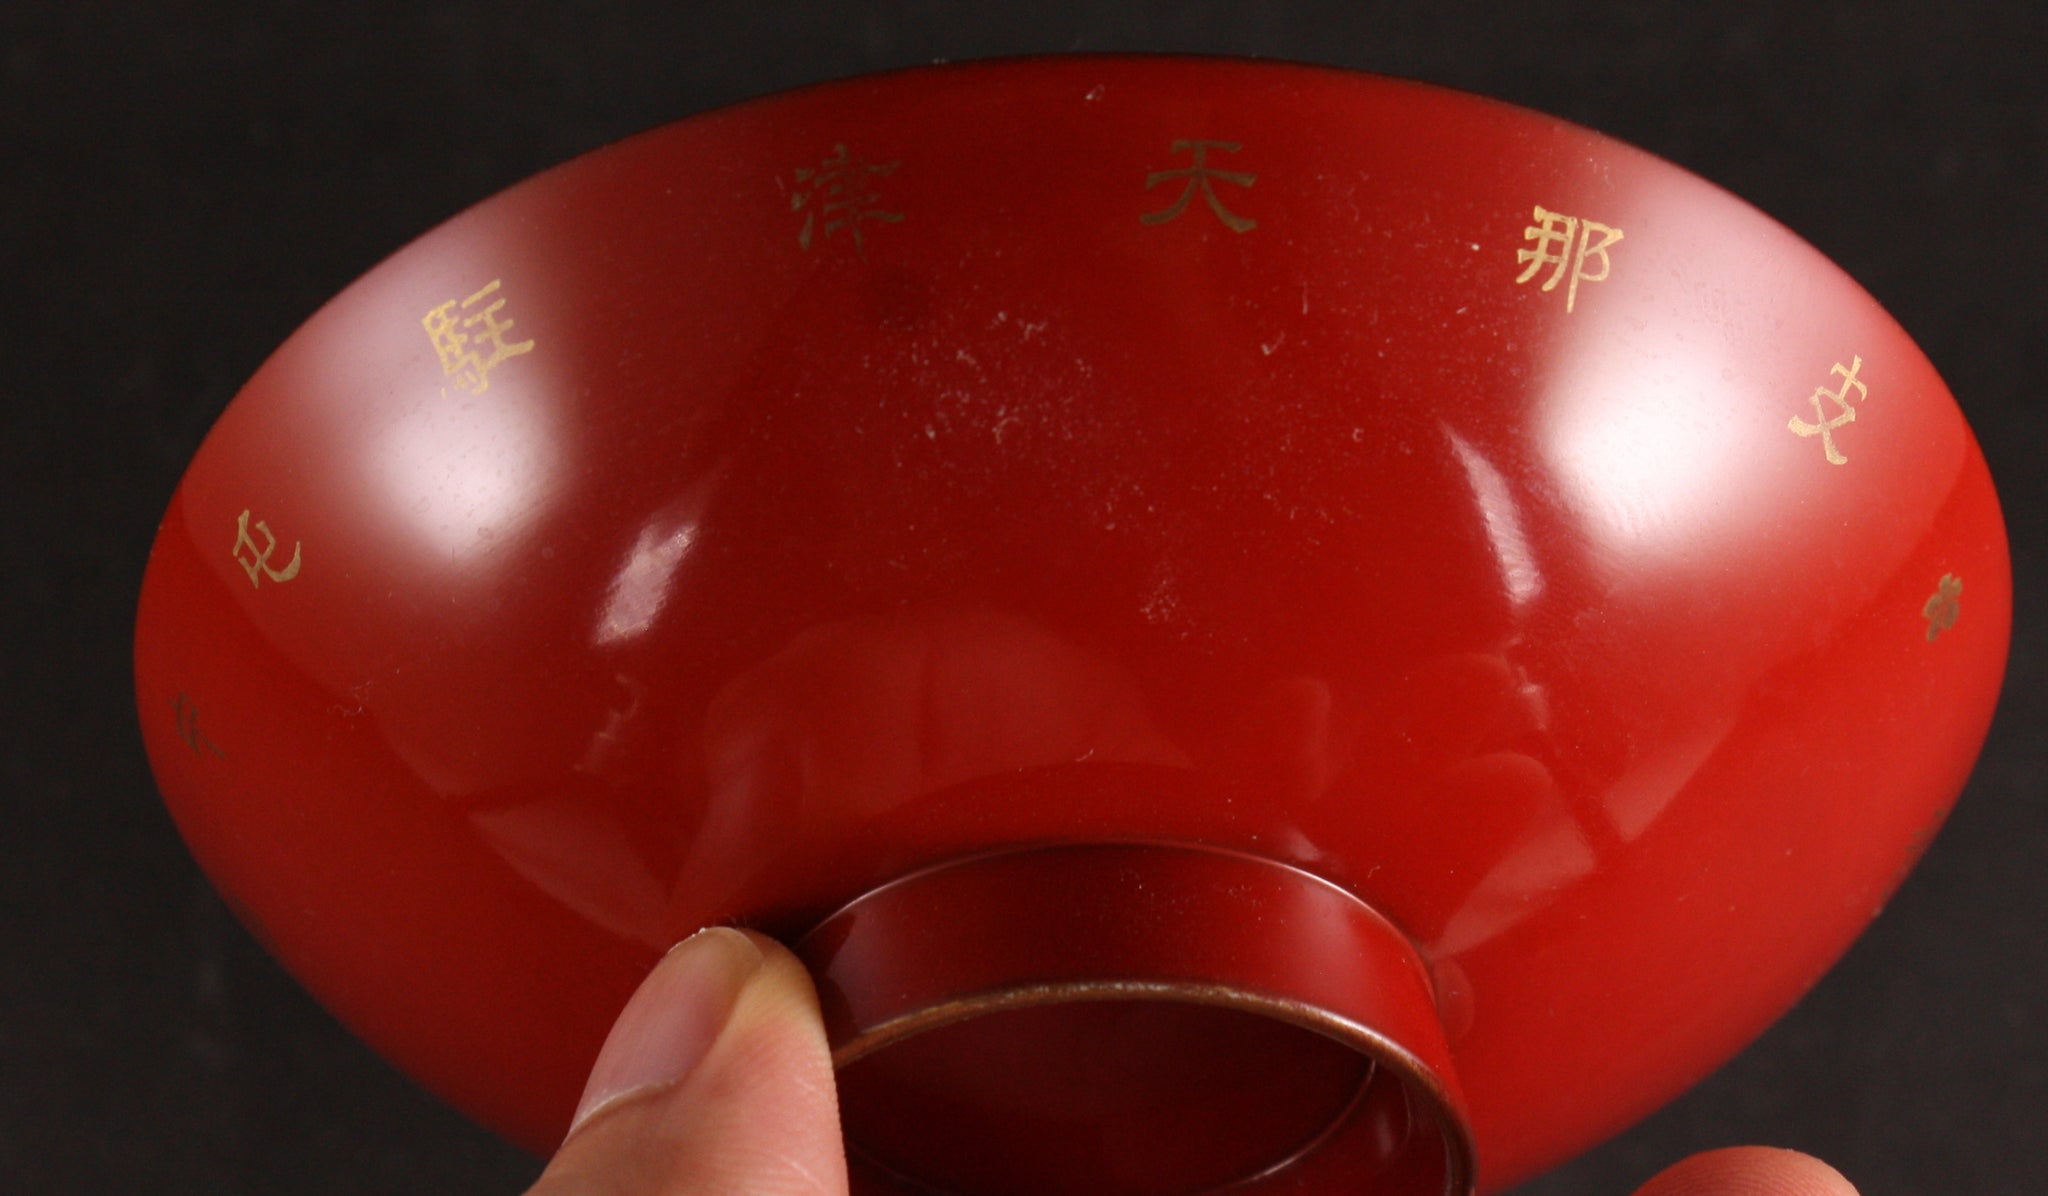 Antique Japanese Military Tianjin (Tientsin) Garrison Imperial Banquet Bestowal Lacquer Army Sake Cup